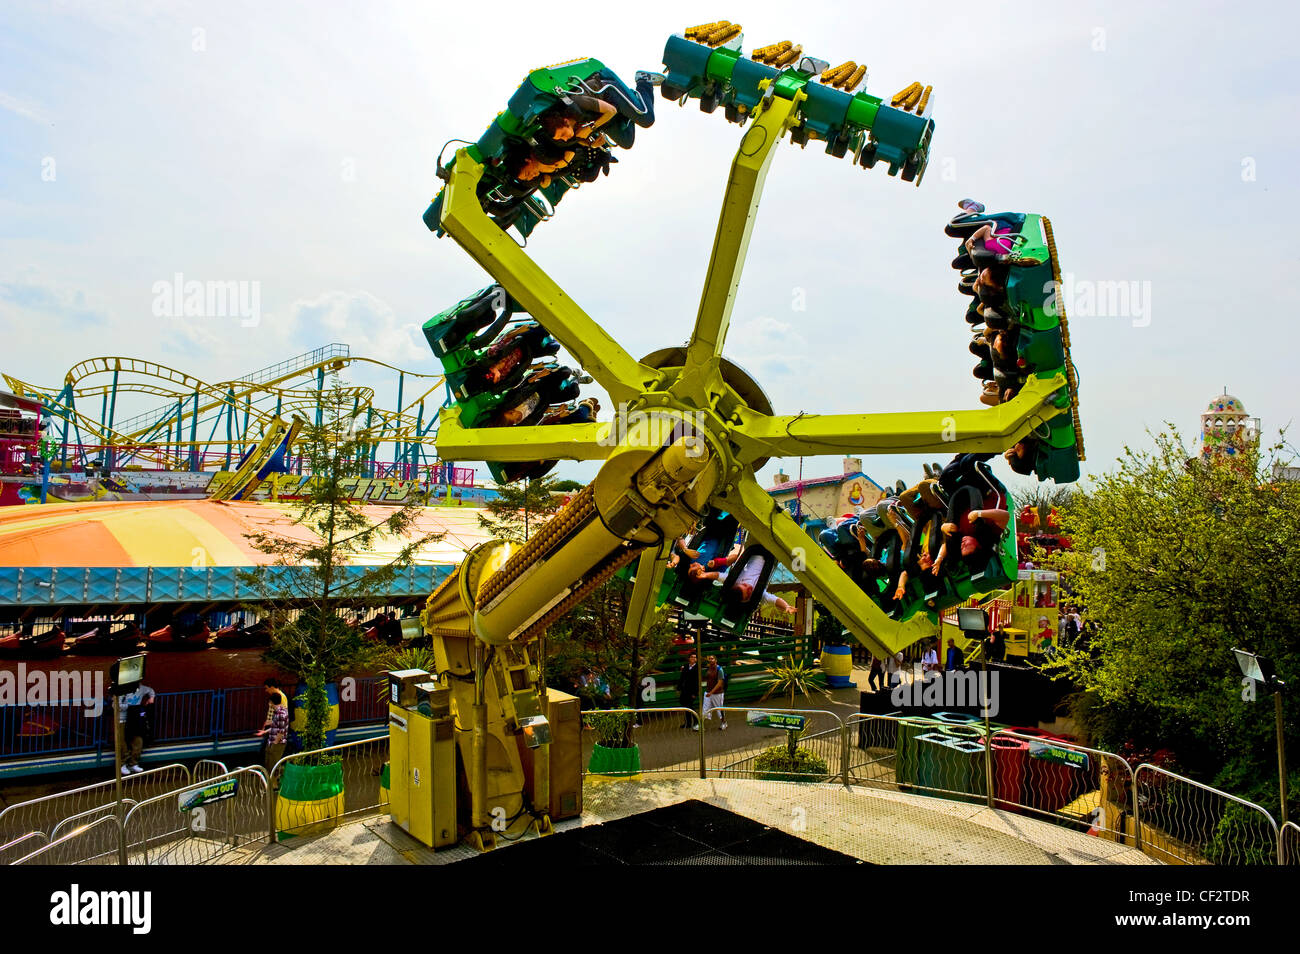 Dragon's Claw, a ride that spins people upside down at Adventure Island in Southend-on-Sea. Stock Photo